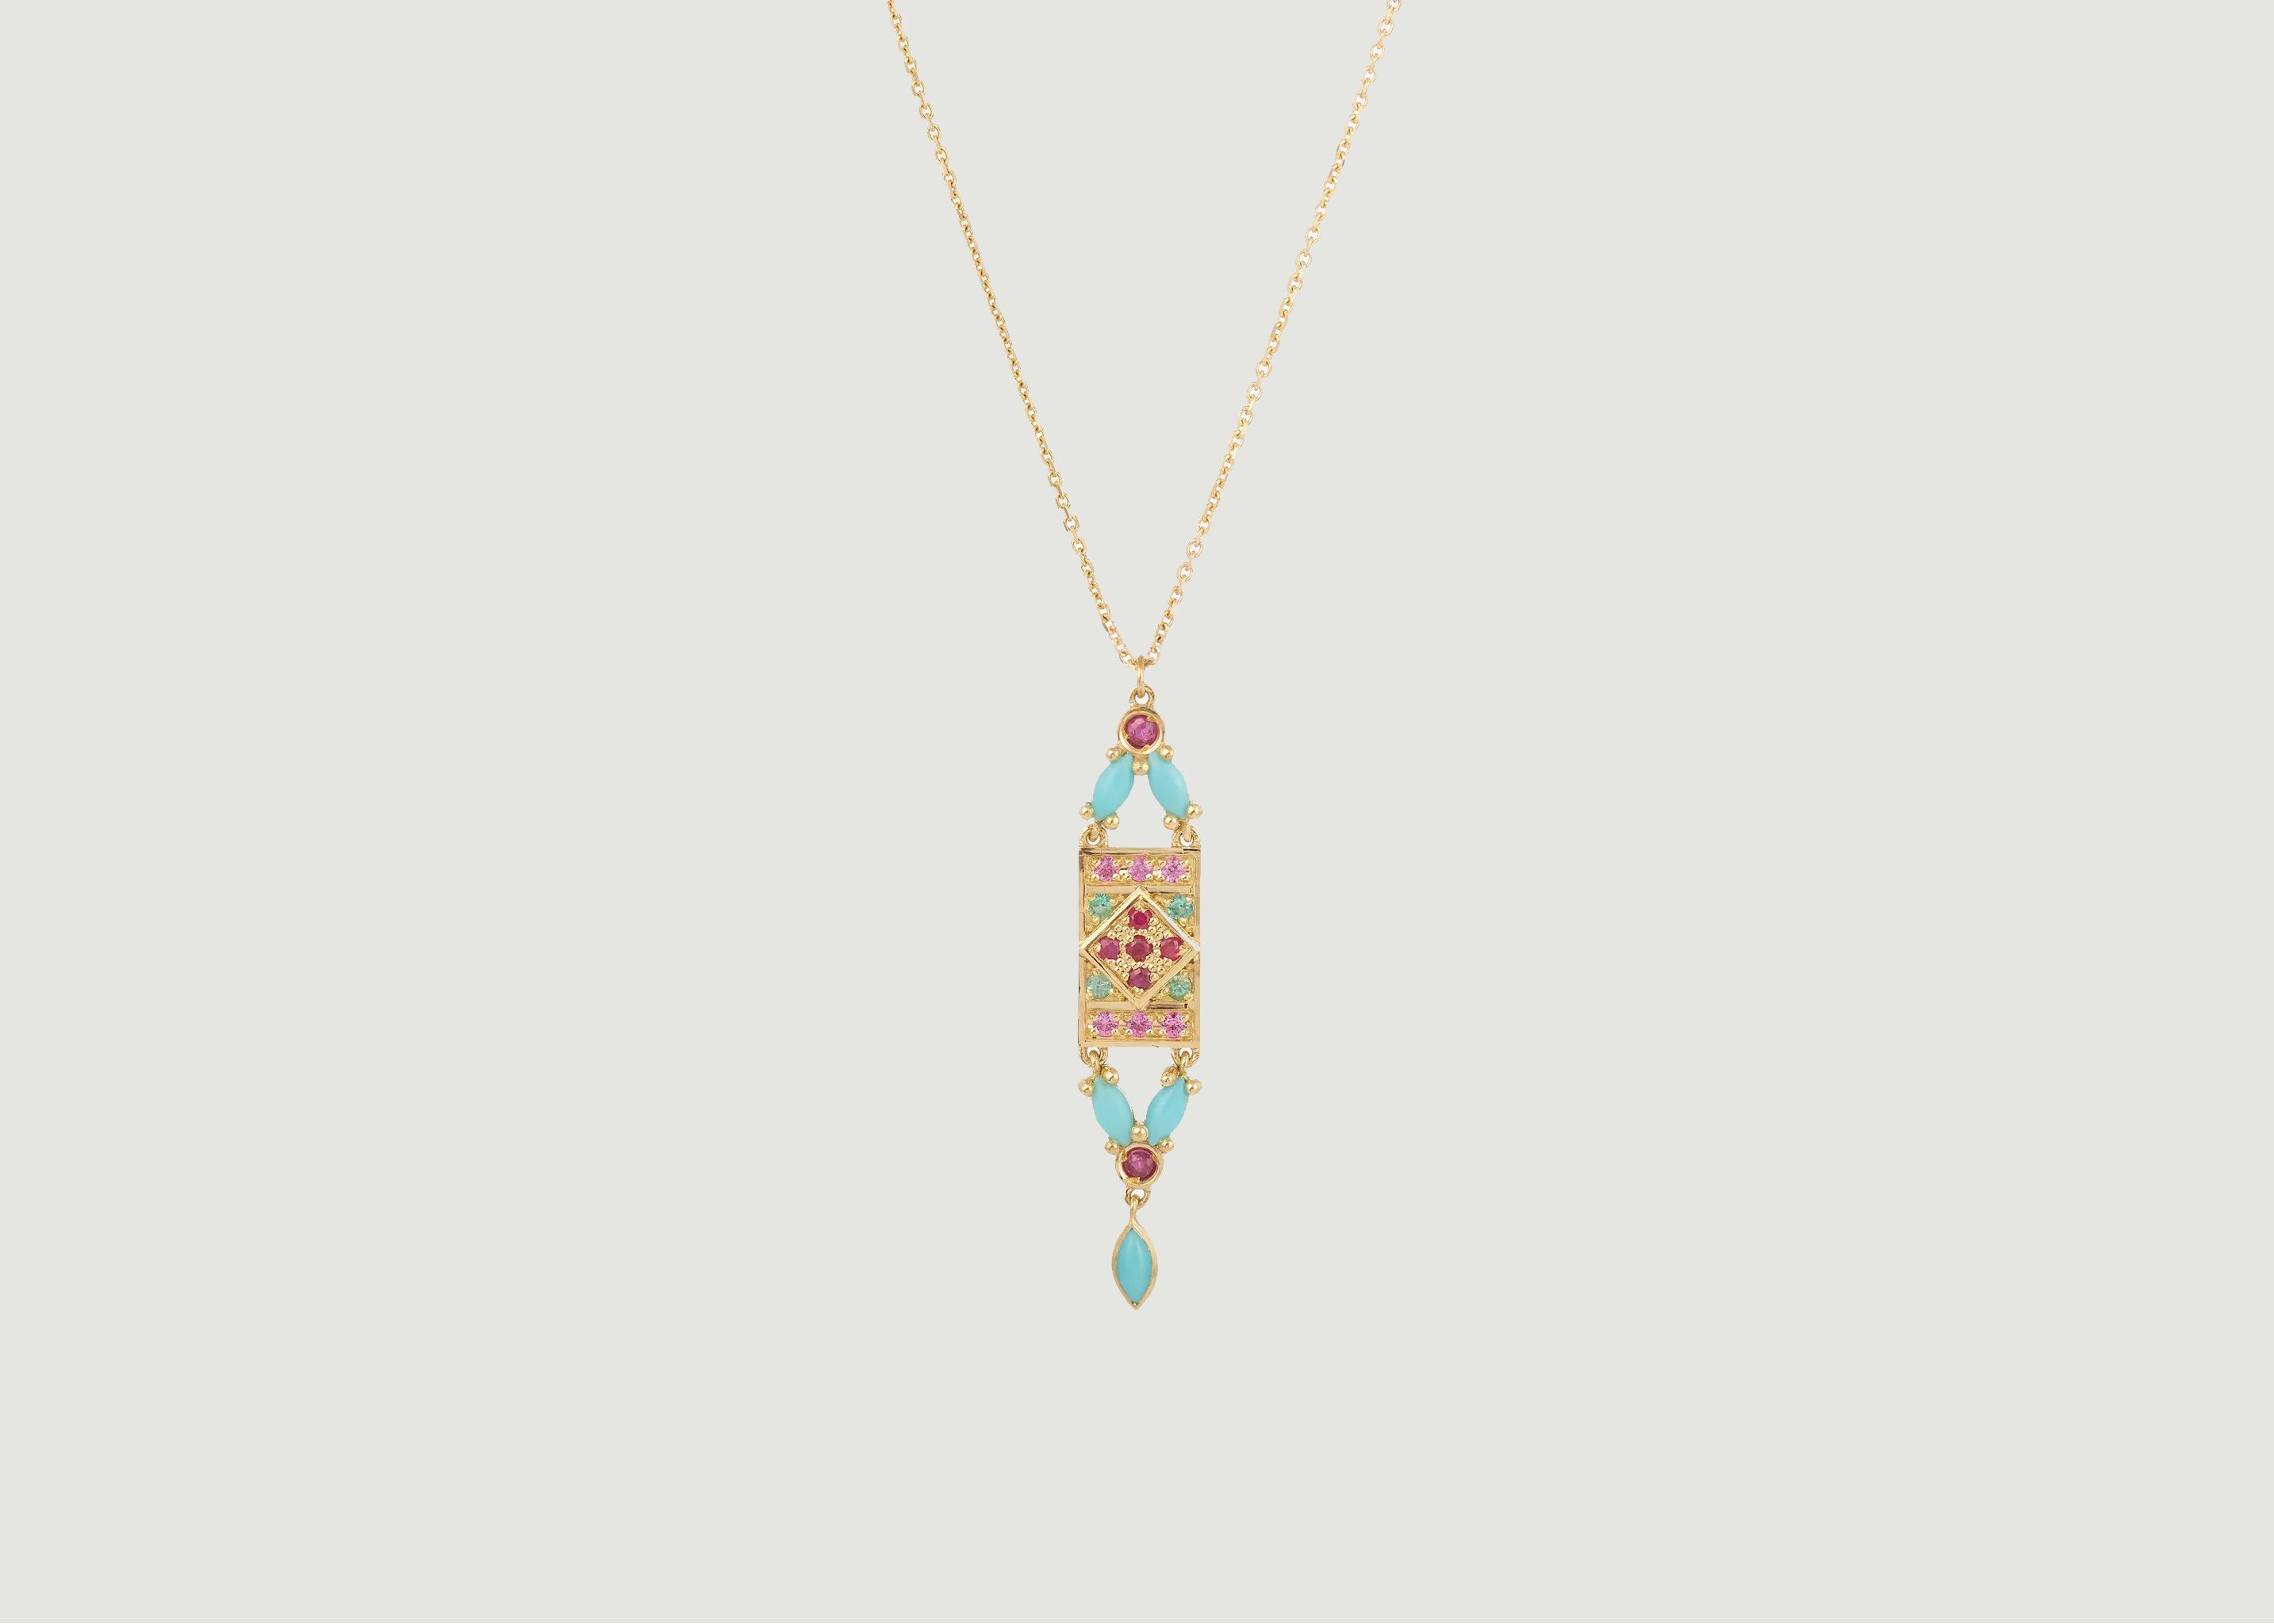 Collier Ava 1 Turquoise - Sophie d'Agon